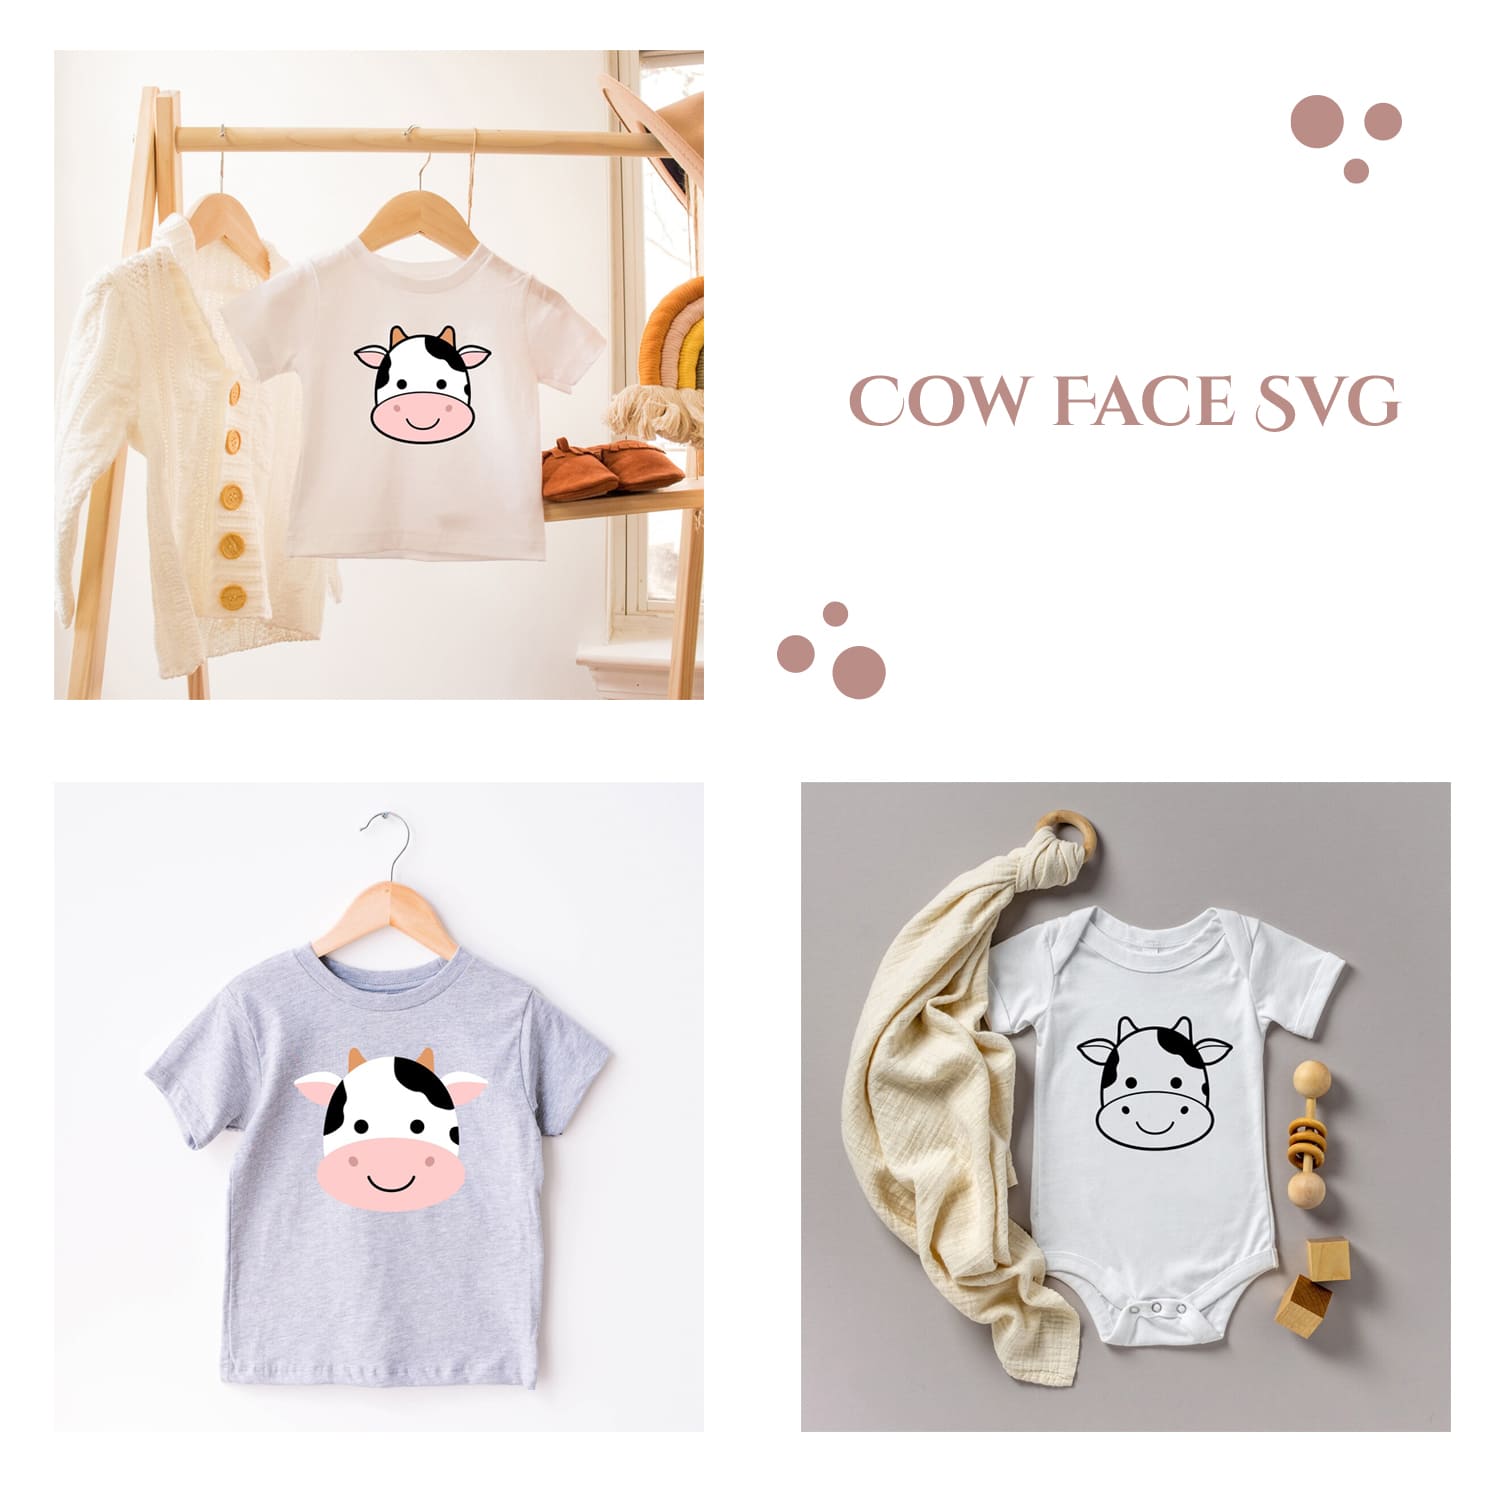 Collage of baby clothes and a cow face t - shirt.